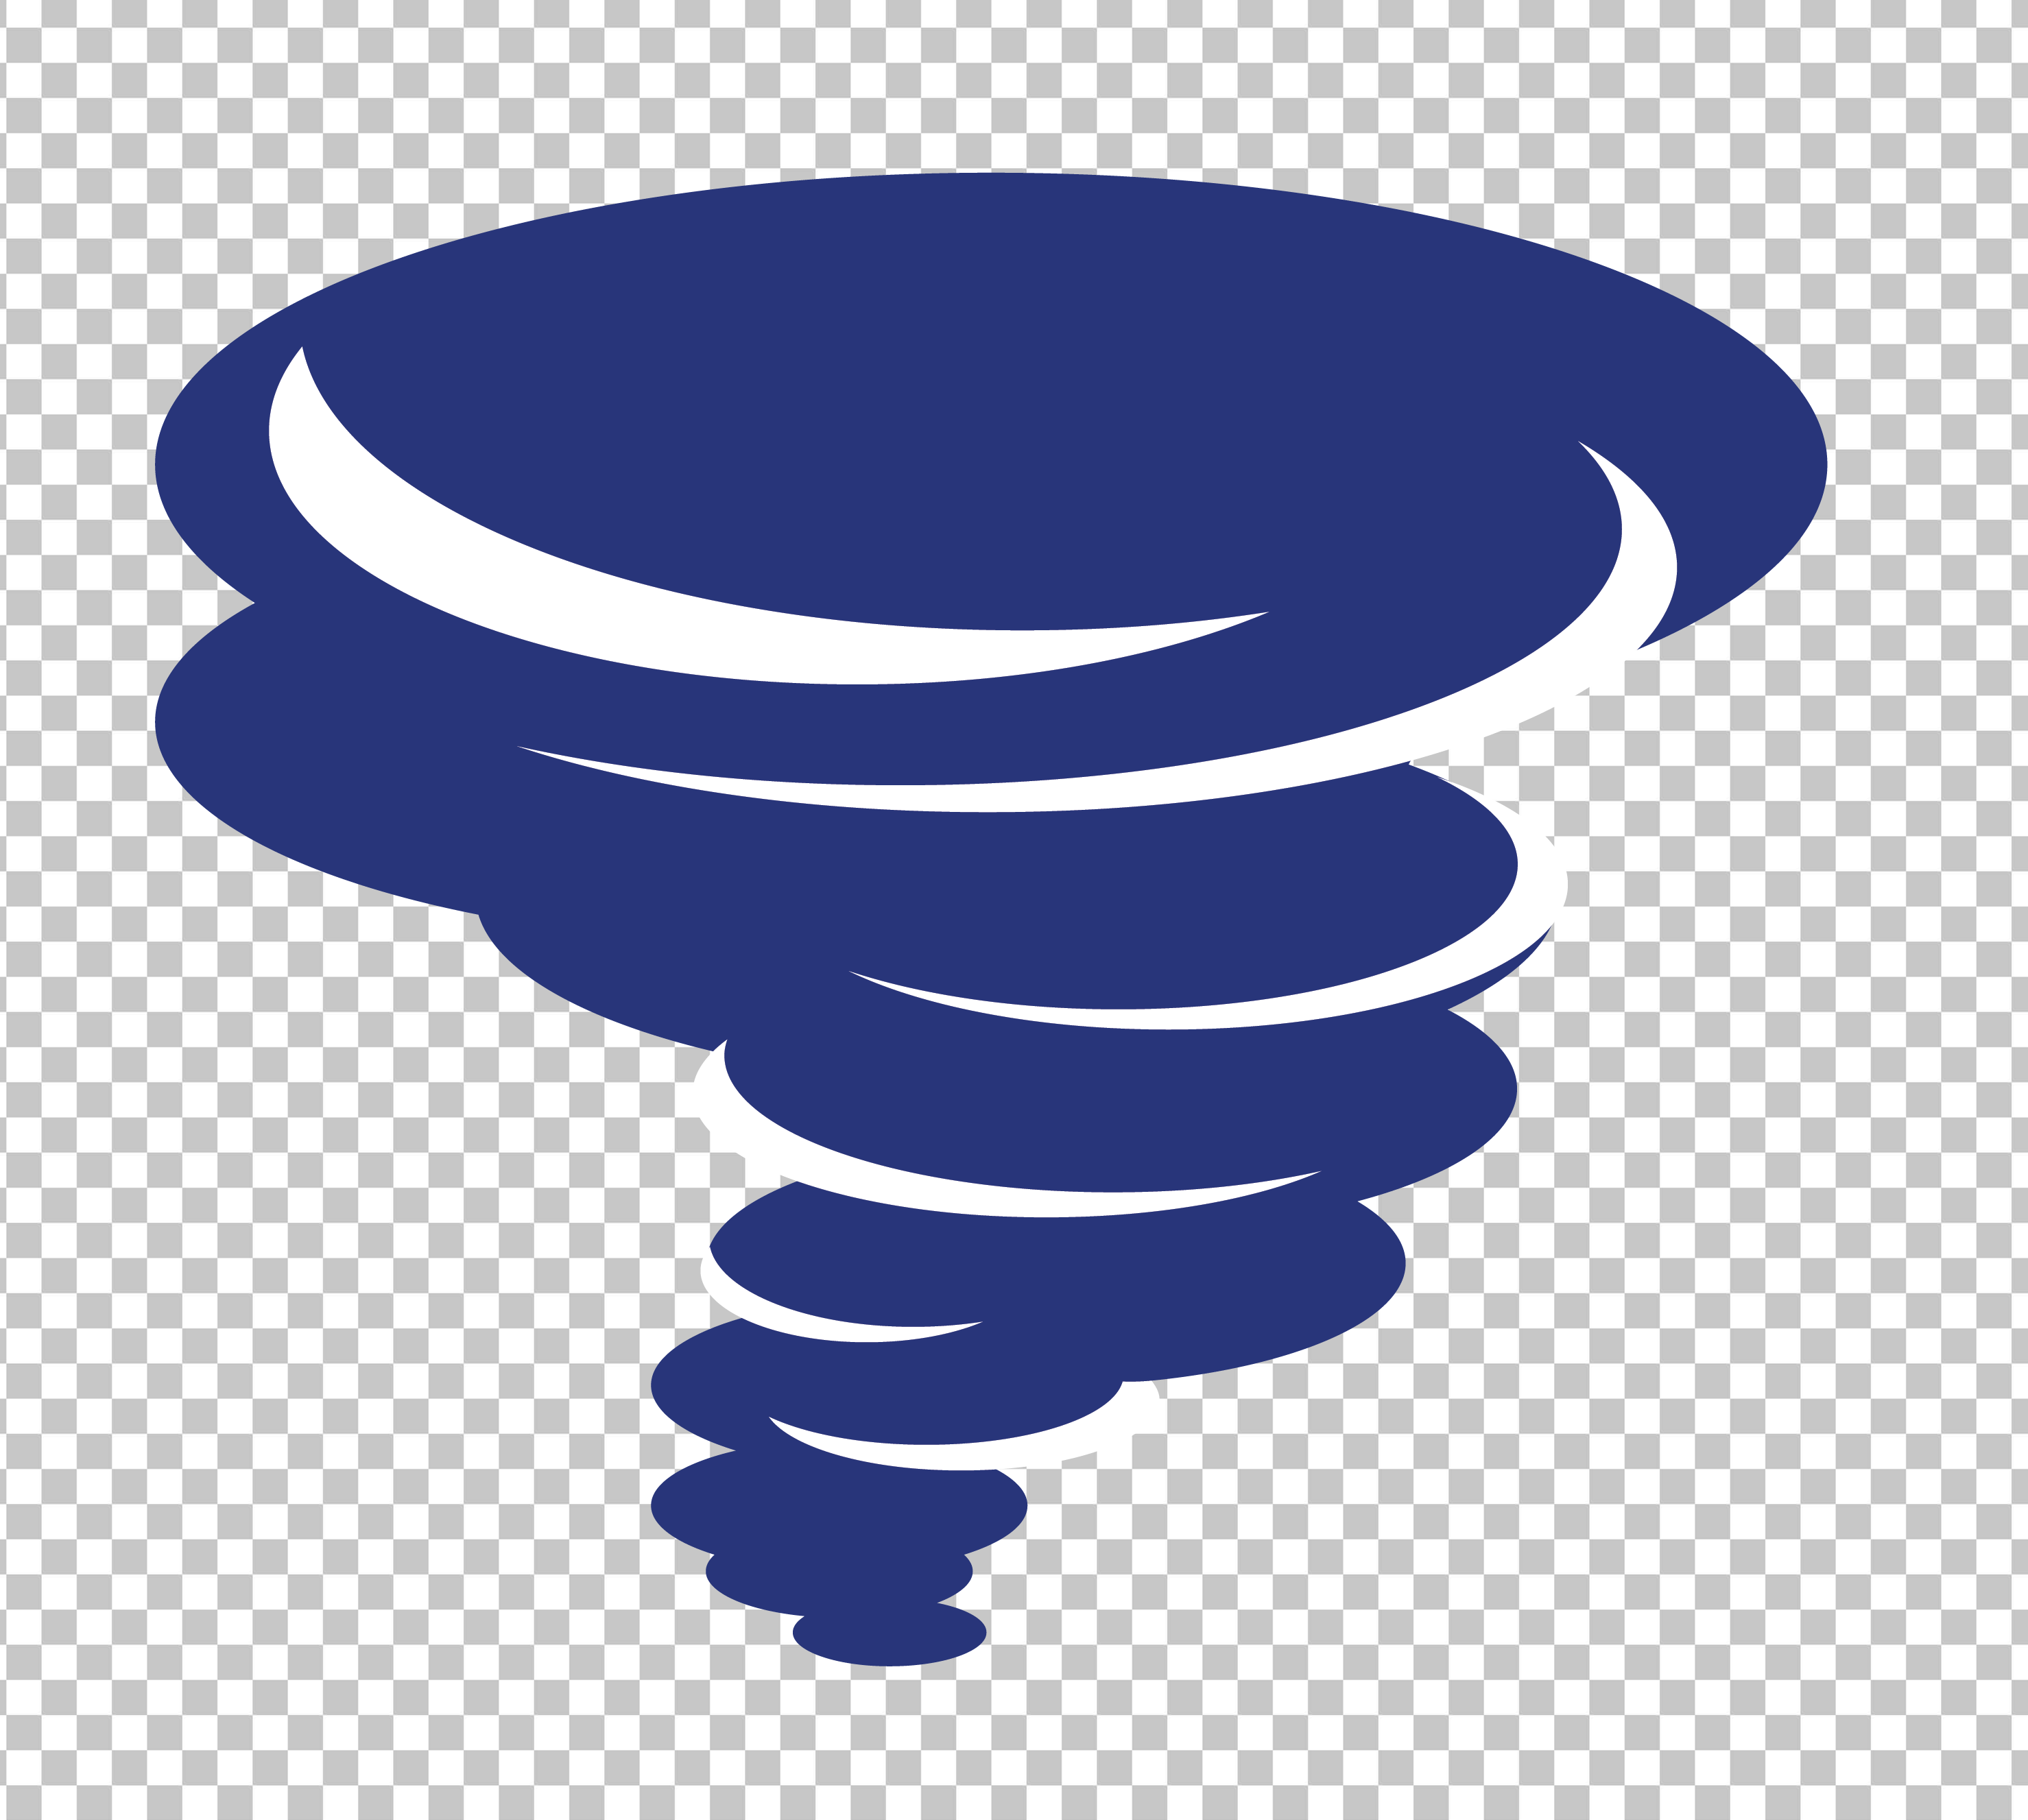 Blue and white Tornado Icon PNG Image